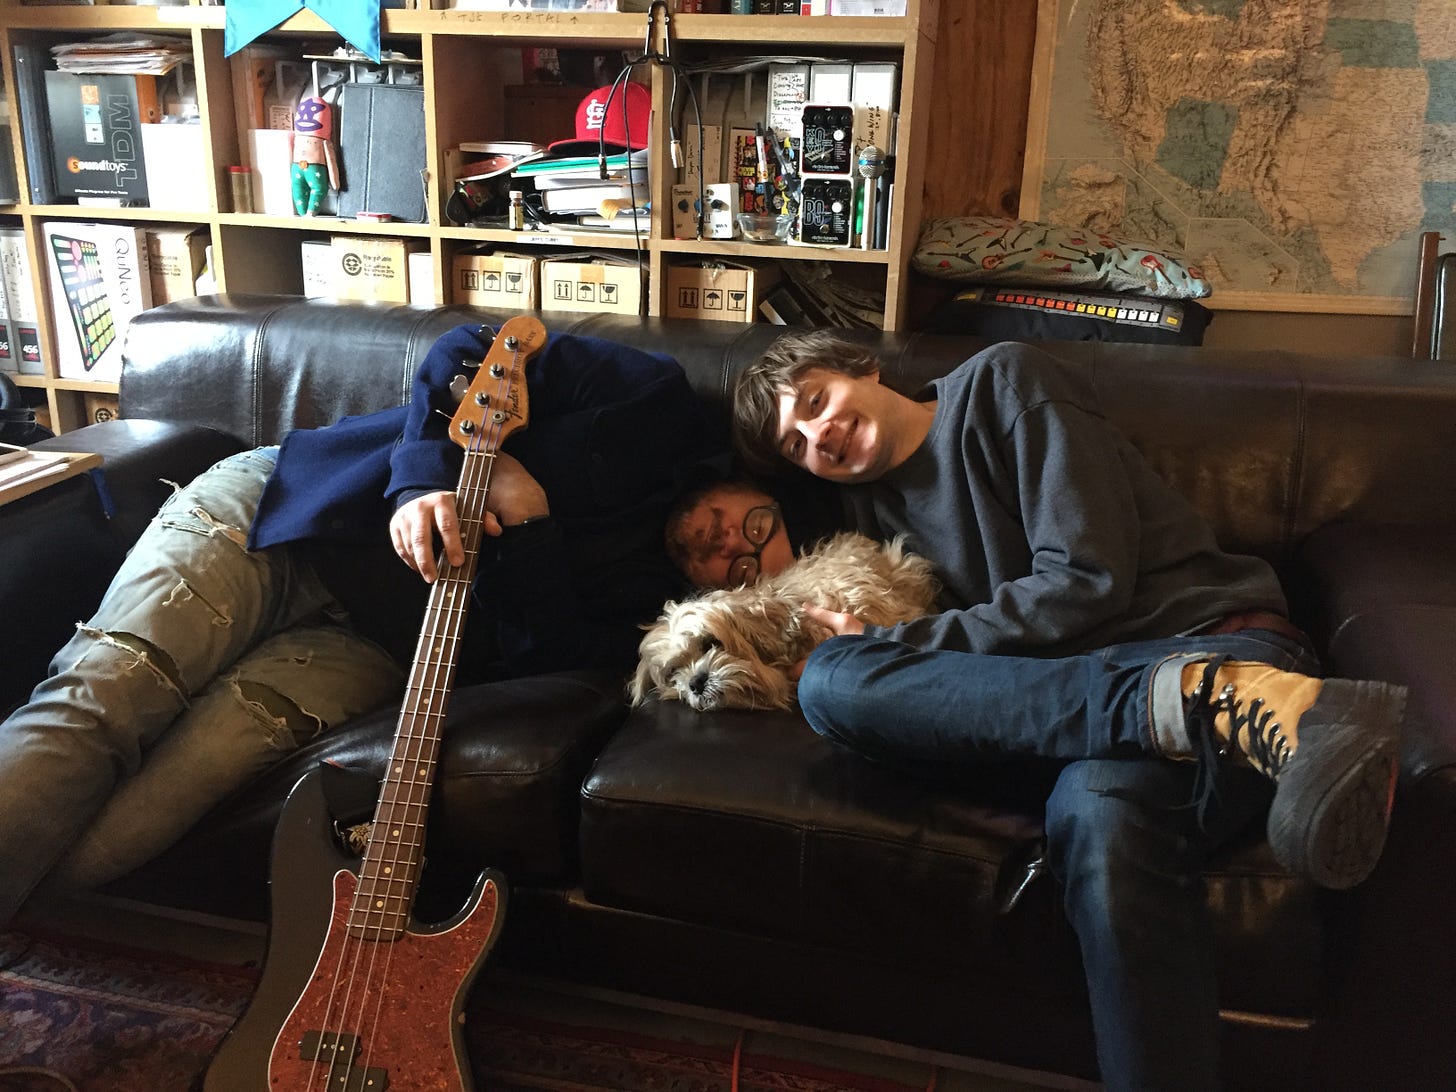 Jeff, Spencer, and a fluffy small dog named Dwight pose on the couch at the Wilco Loft.